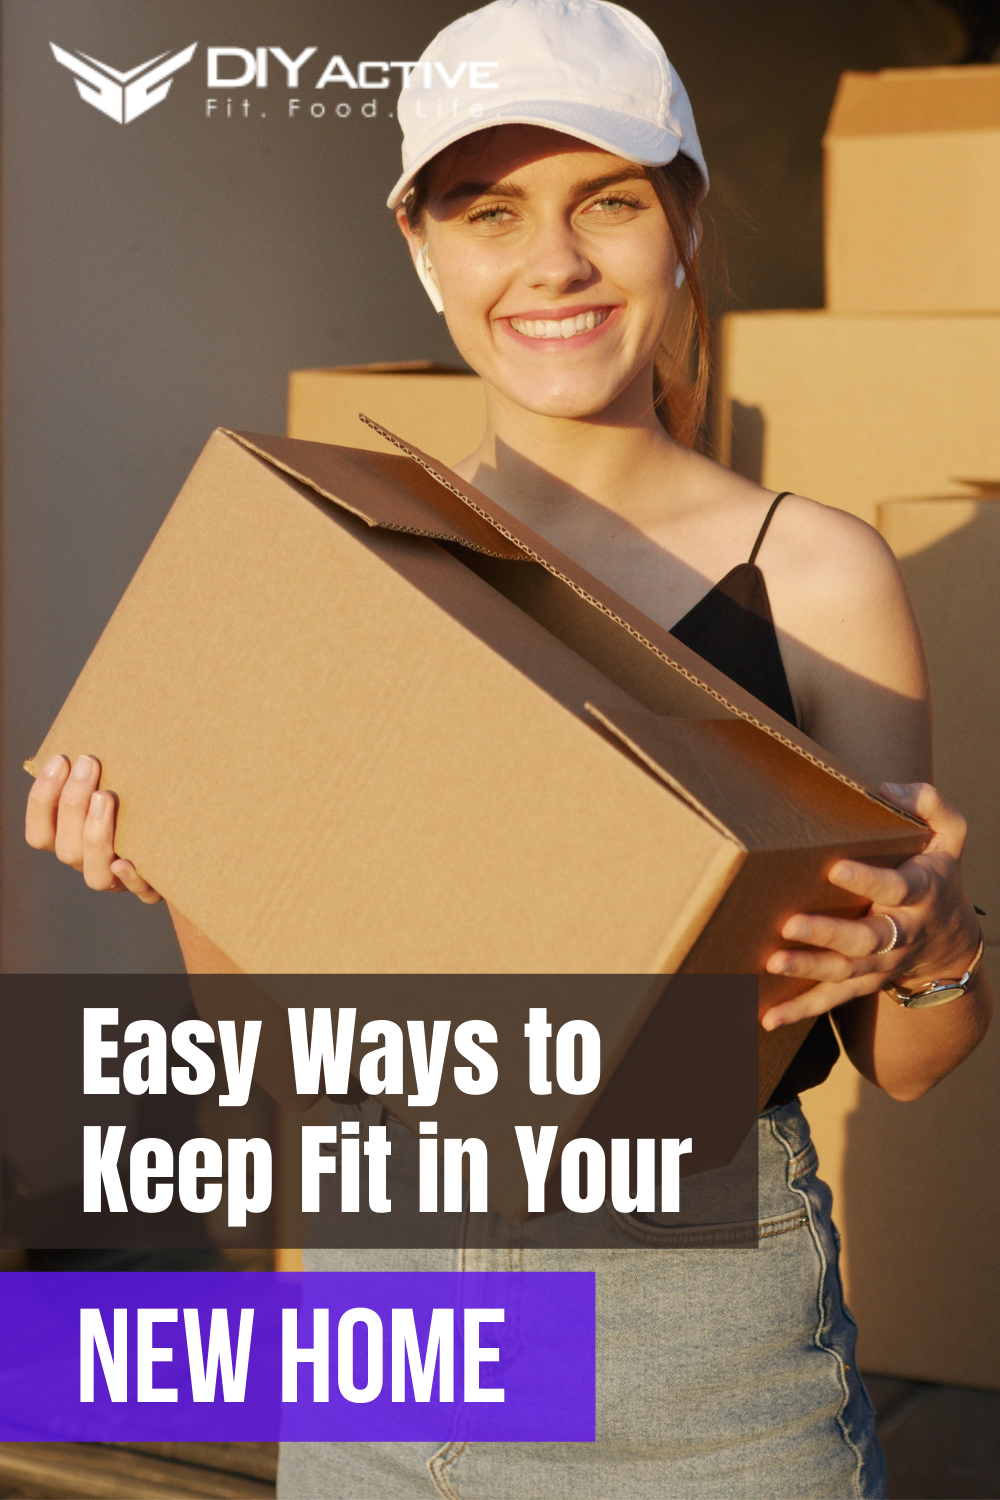 Just Moved House? Here are Some Easy Ways to Keep Fit in Your New Home